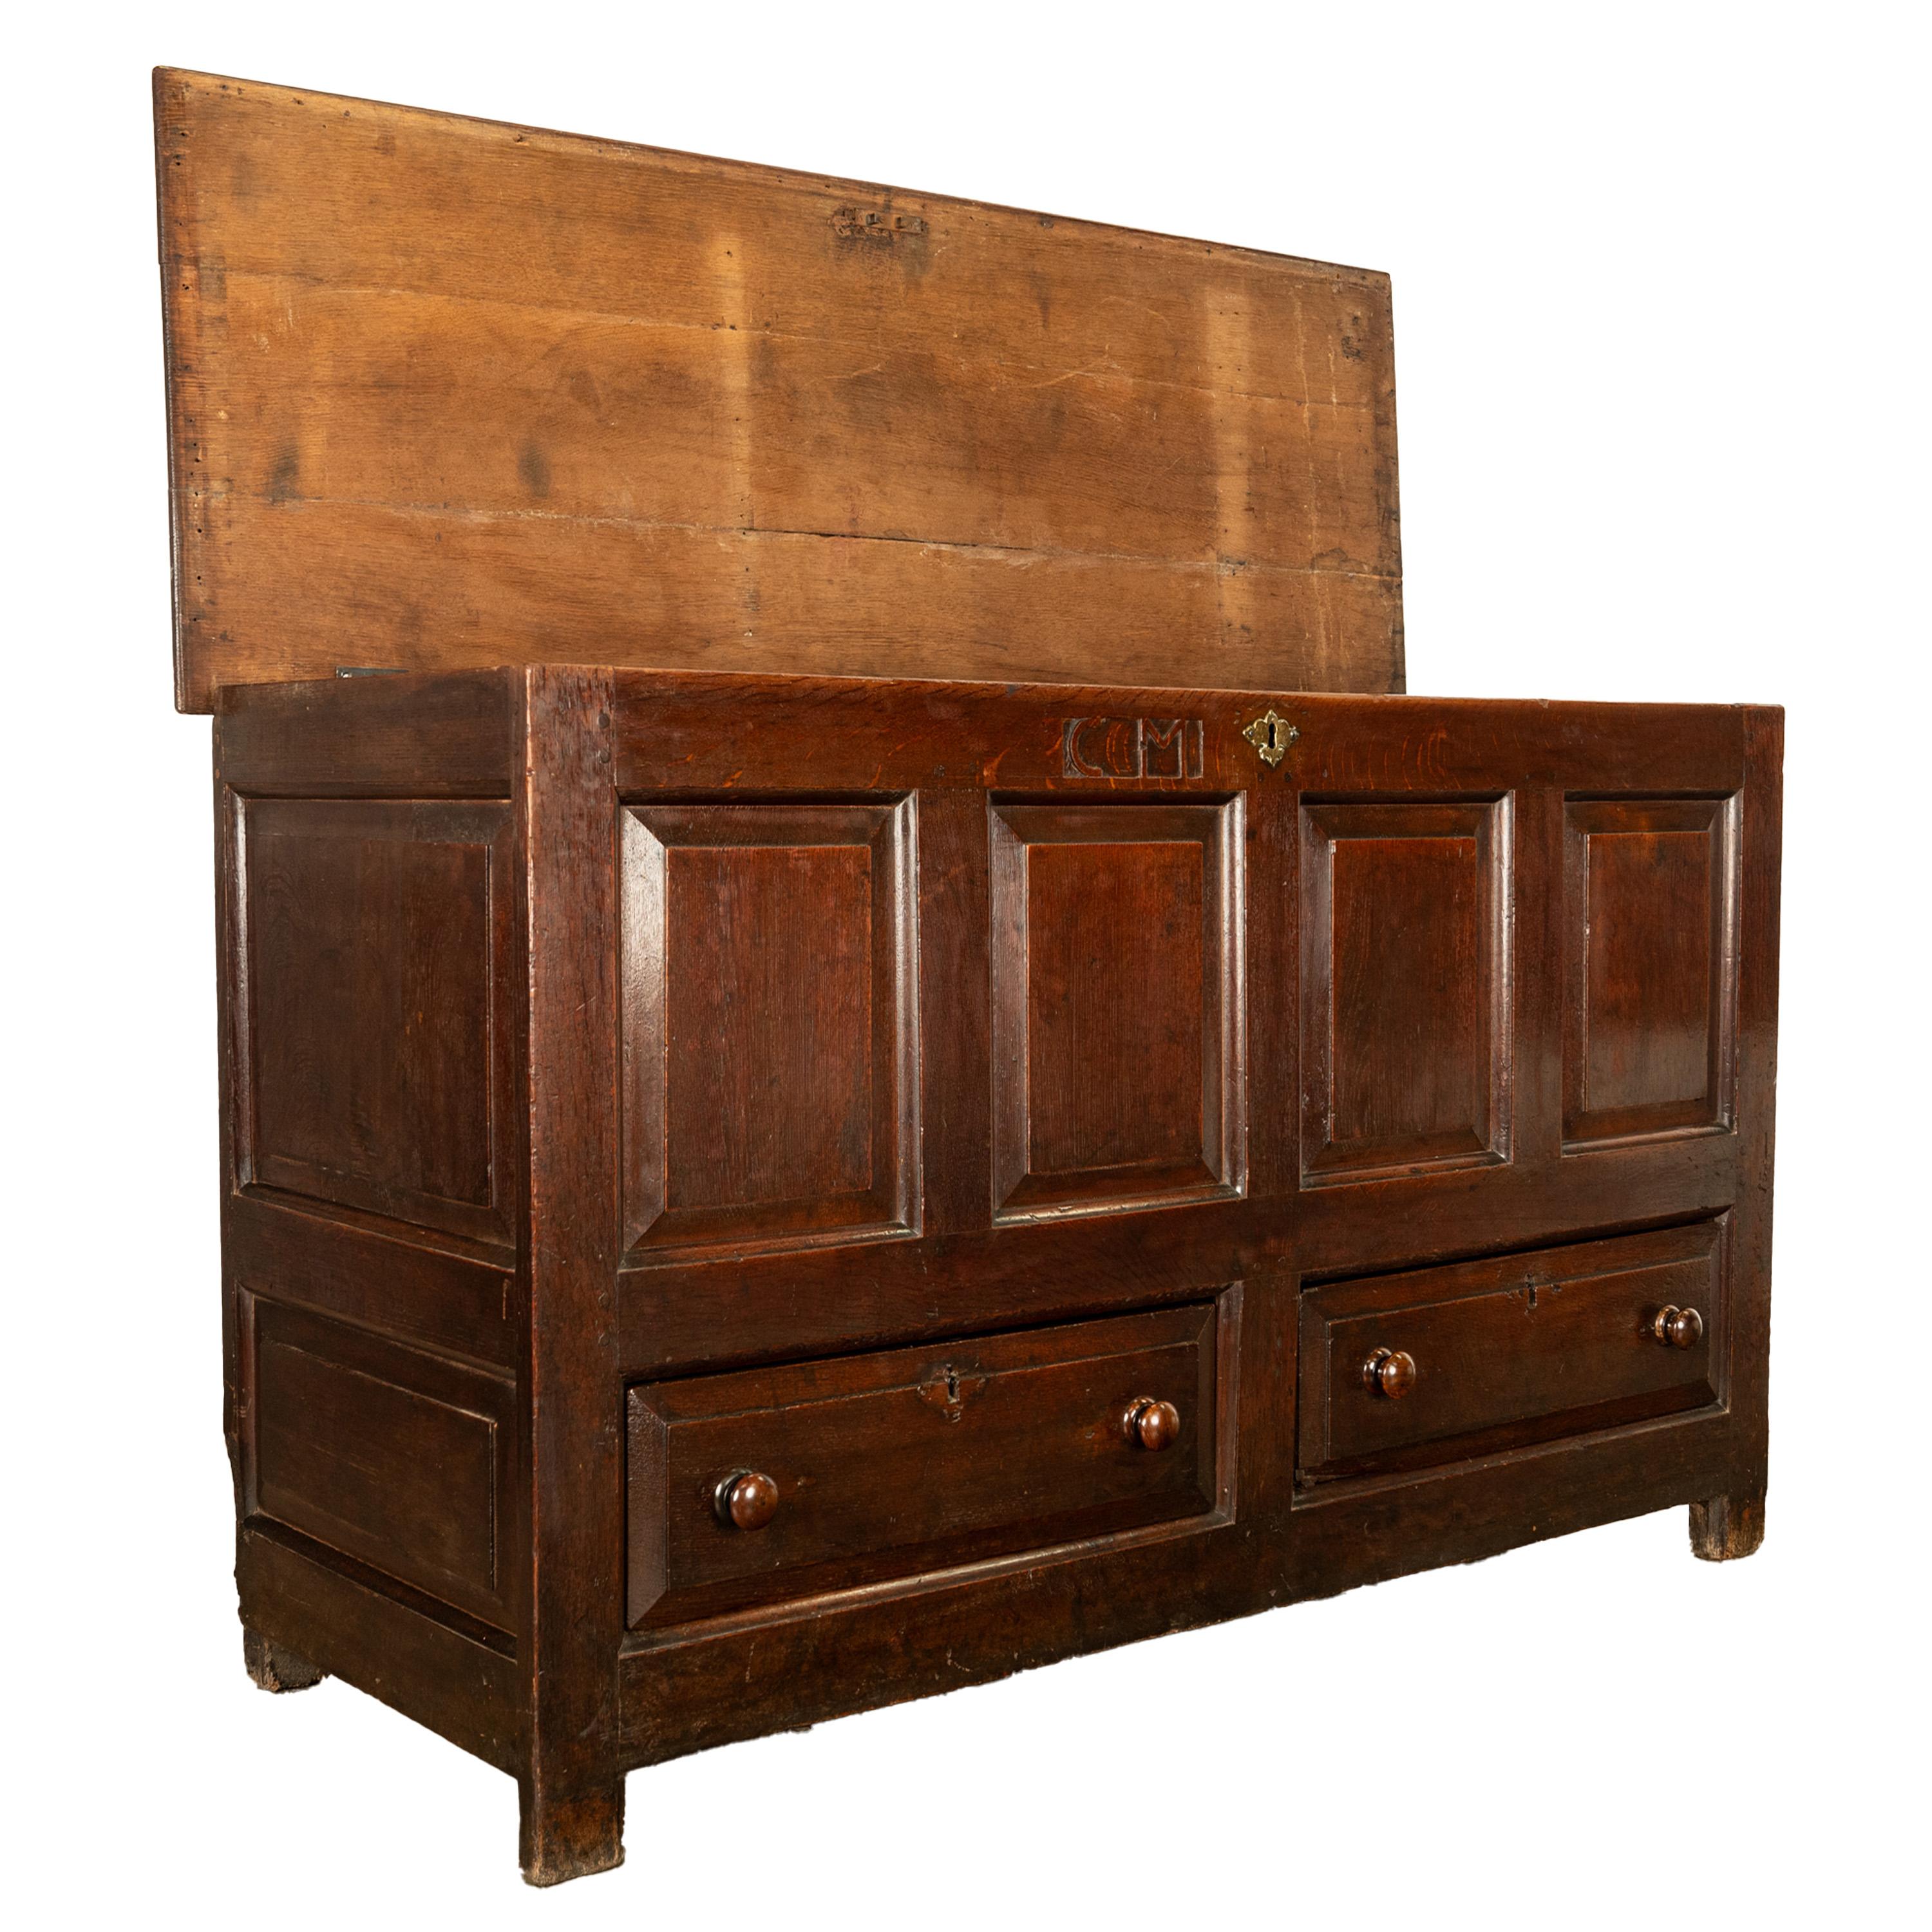 Monumental Antique Georgian Joined Oak Mule Dowry Chest Coffer Yorkshire 1720 For Sale 7